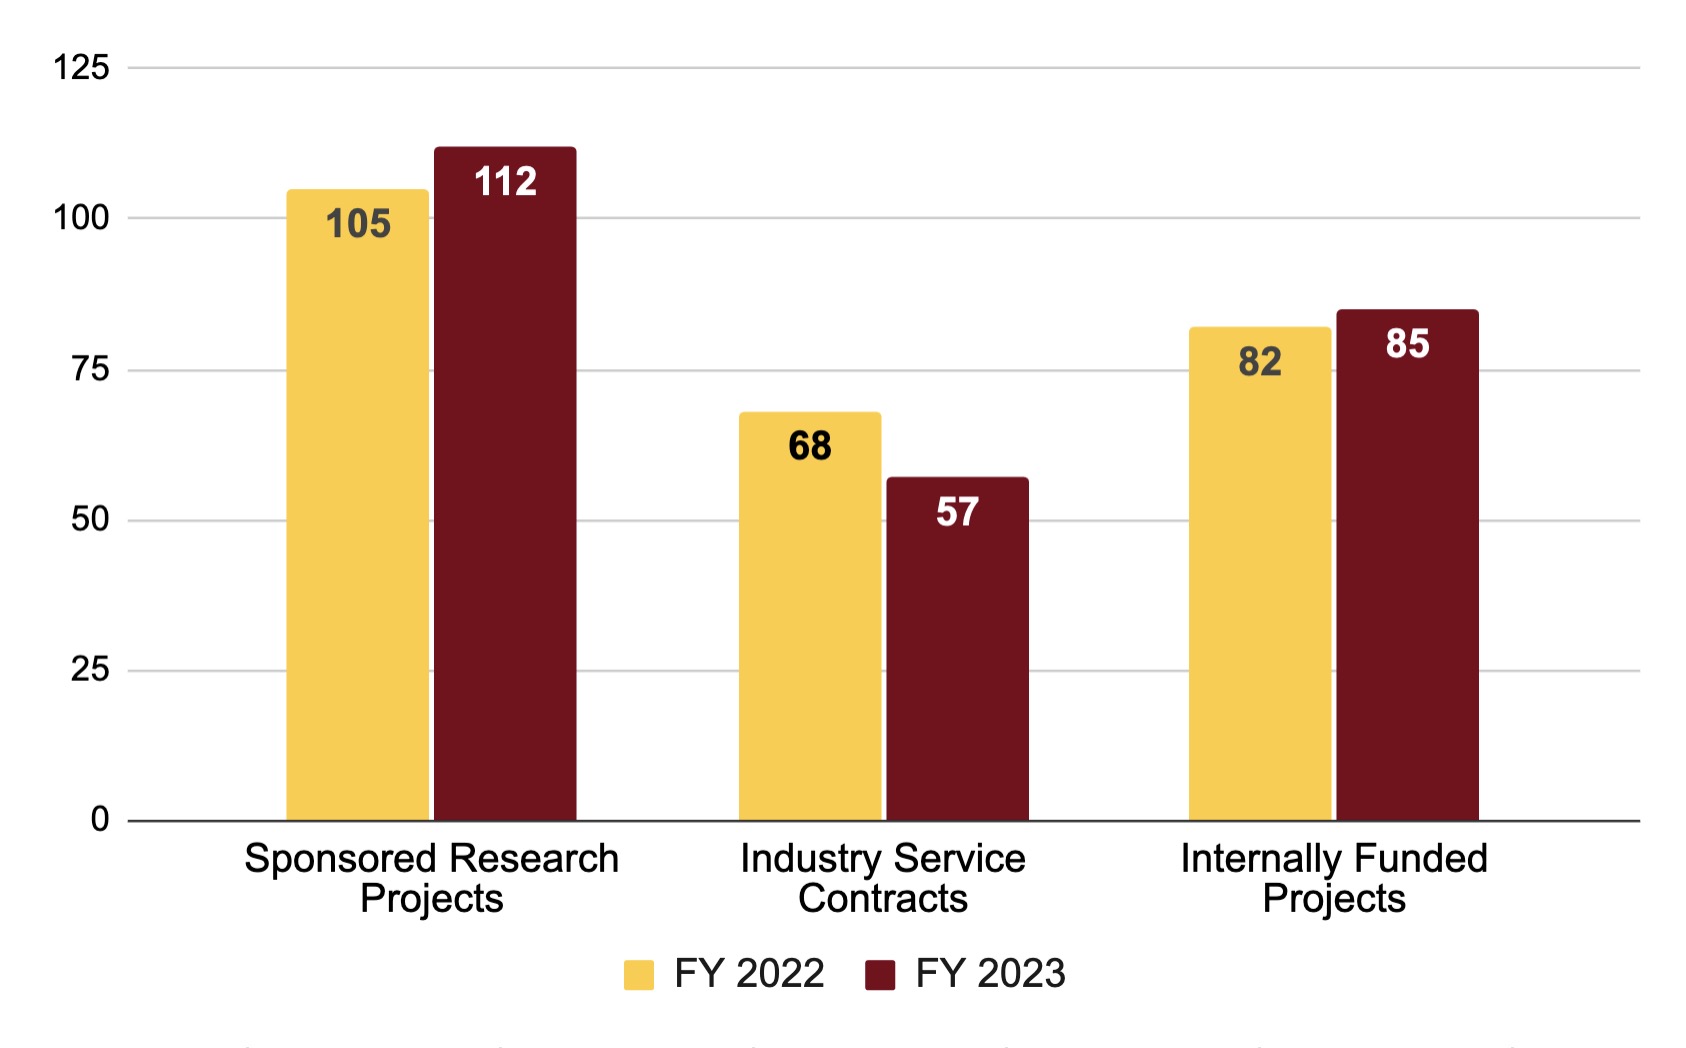 Chart: Sponsored Research Projects - 105 in FY 2022, 112 in FY 2023; Industry Service Contracts - 68 in FY 2022, 57 in FY 2023; Internally Funded Projects - 82 in FY 2022, 85 in FY 2023